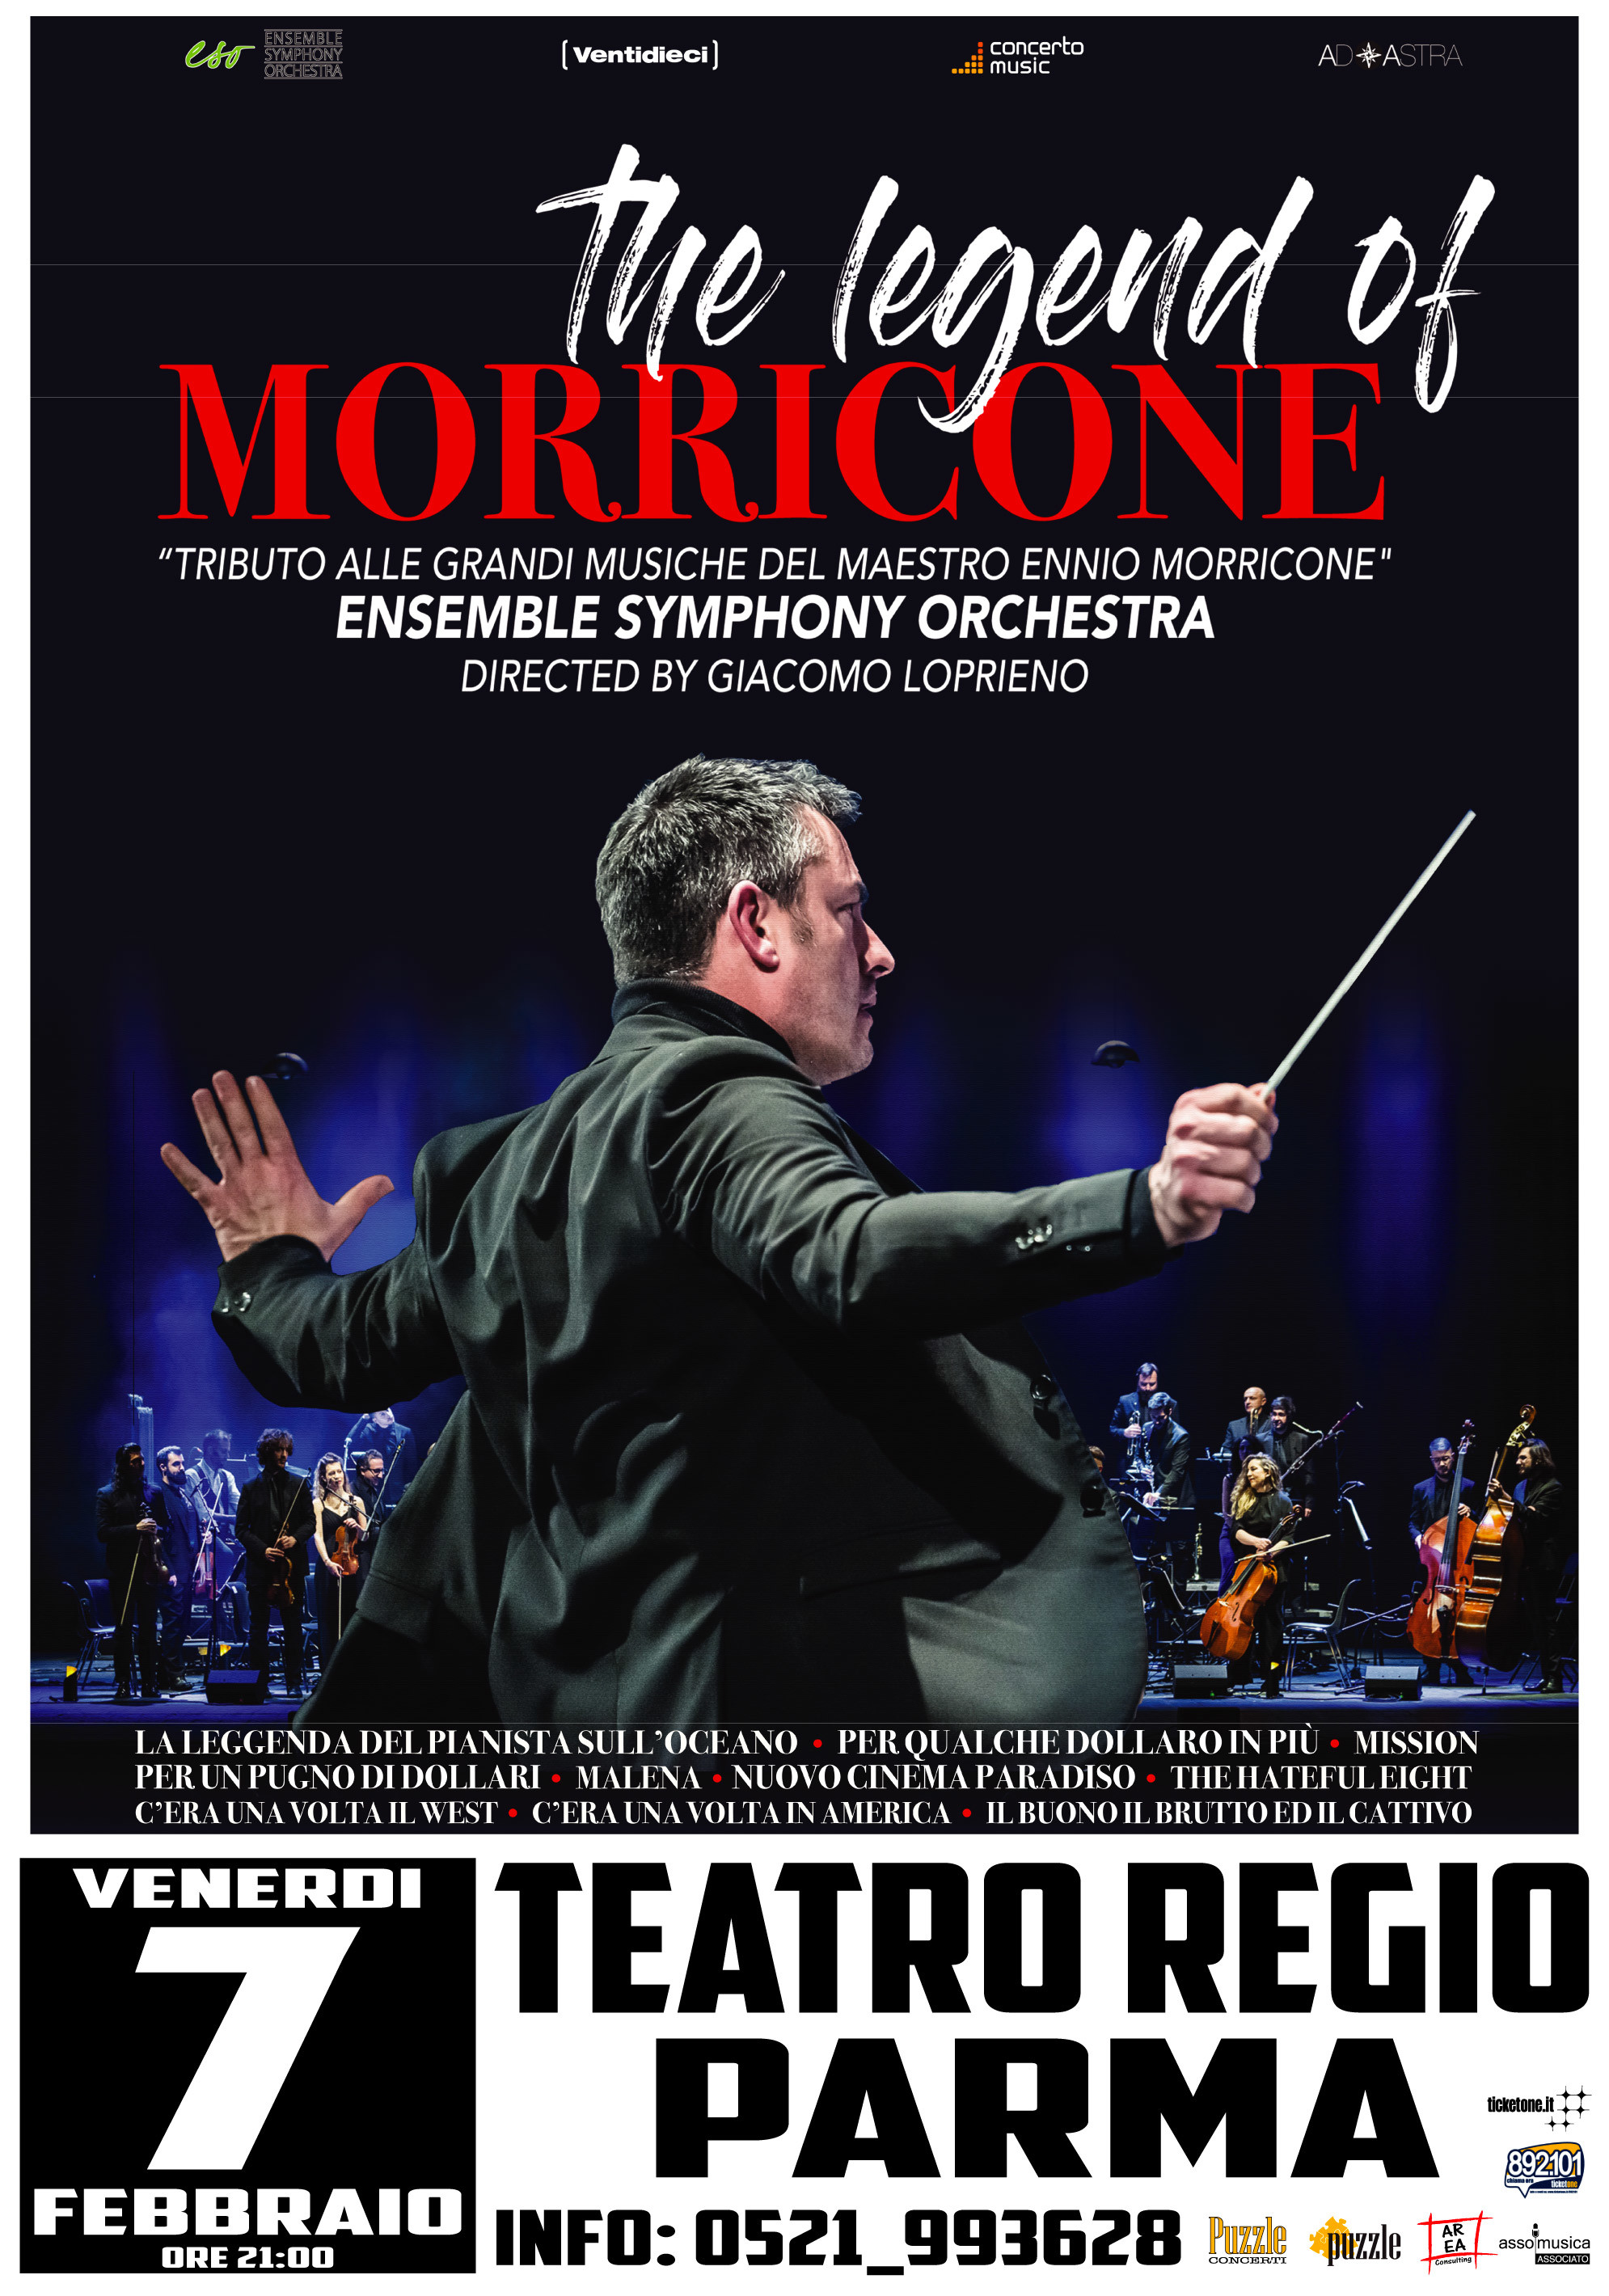 The legend of Morricone